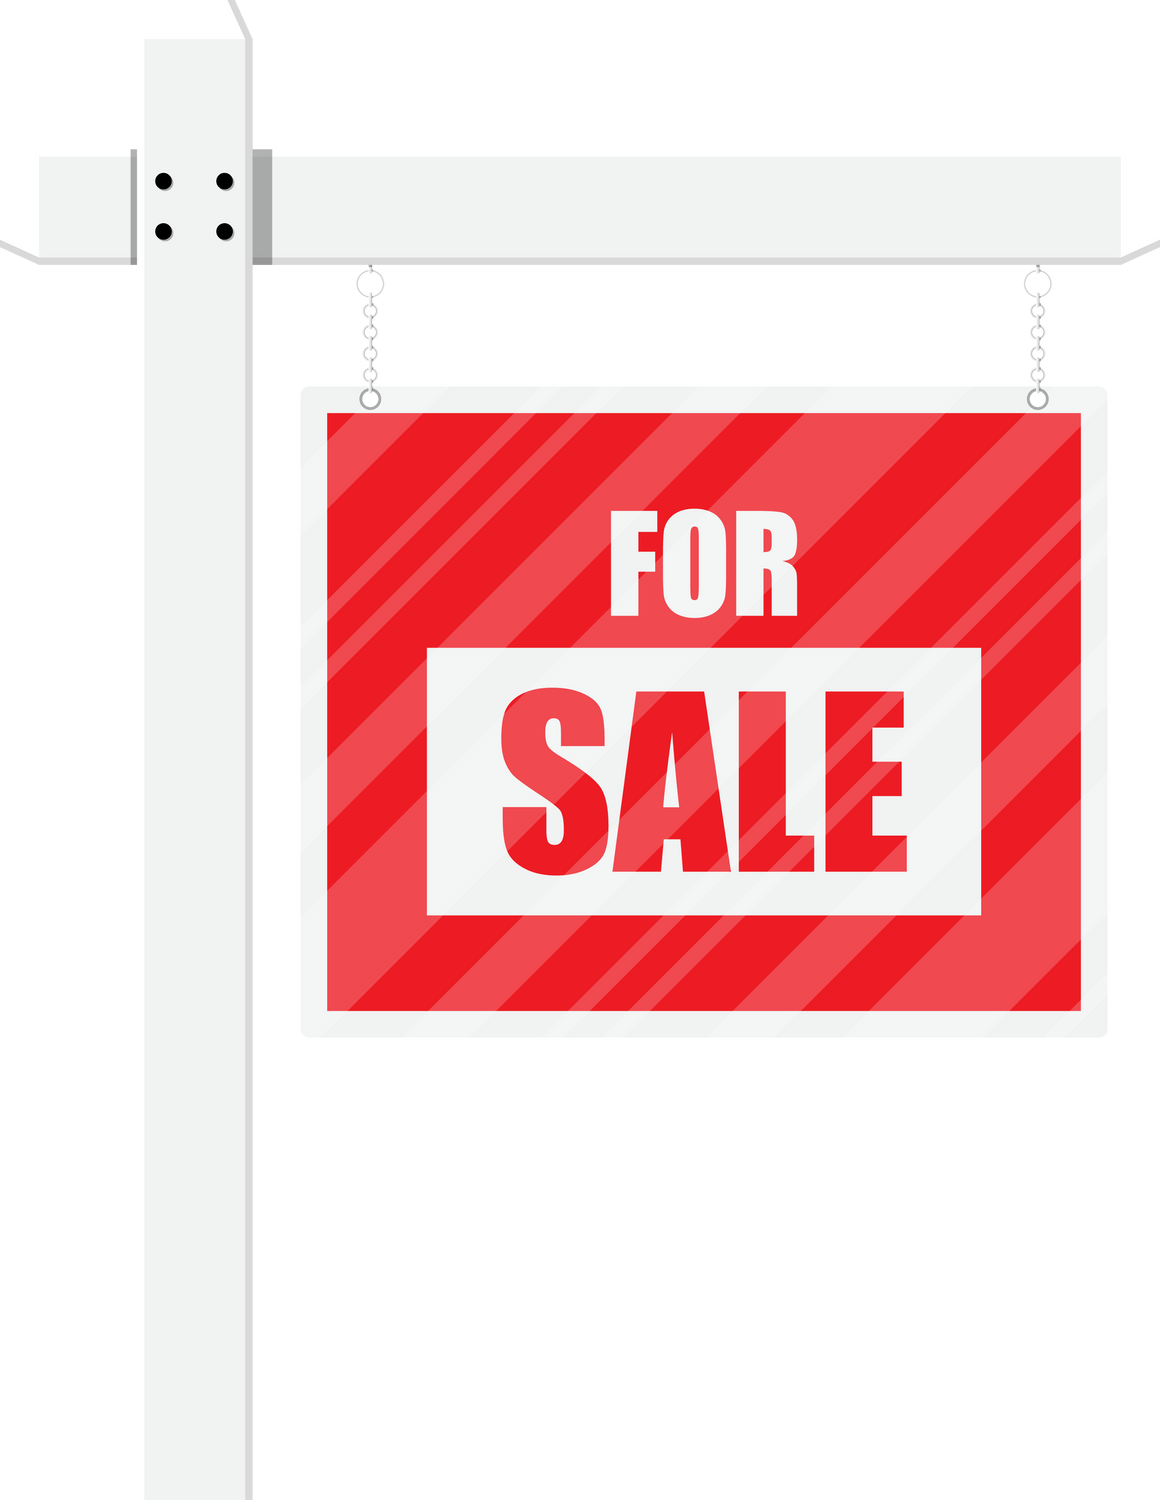 For Sale Wooden Placard. Real Estate Sign